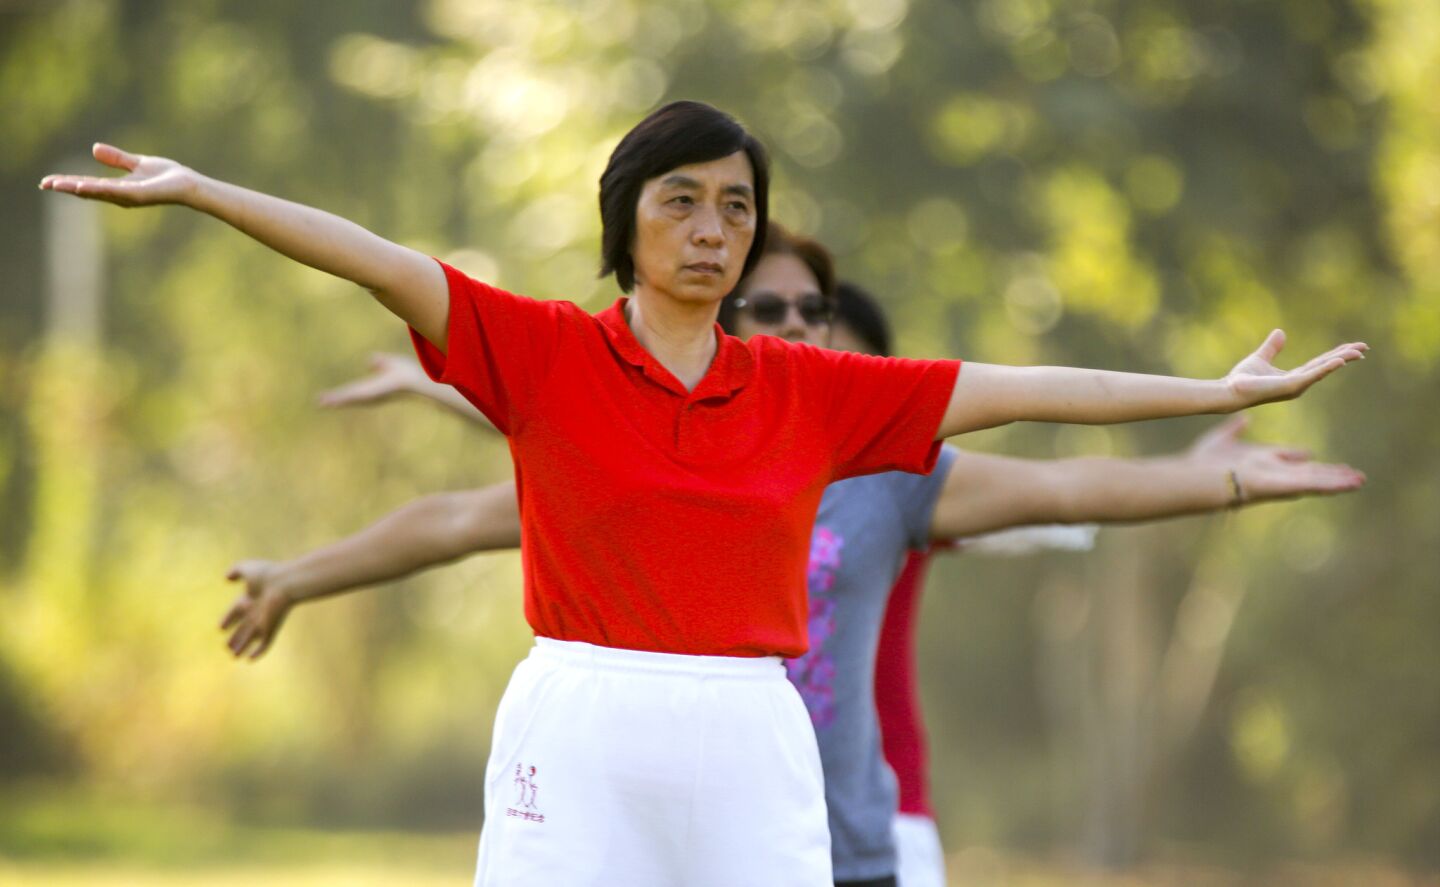 To beat the heat, Lily Lin leads an early morning Tai Chi class at Vincent Lugo Park in San Gabriel.